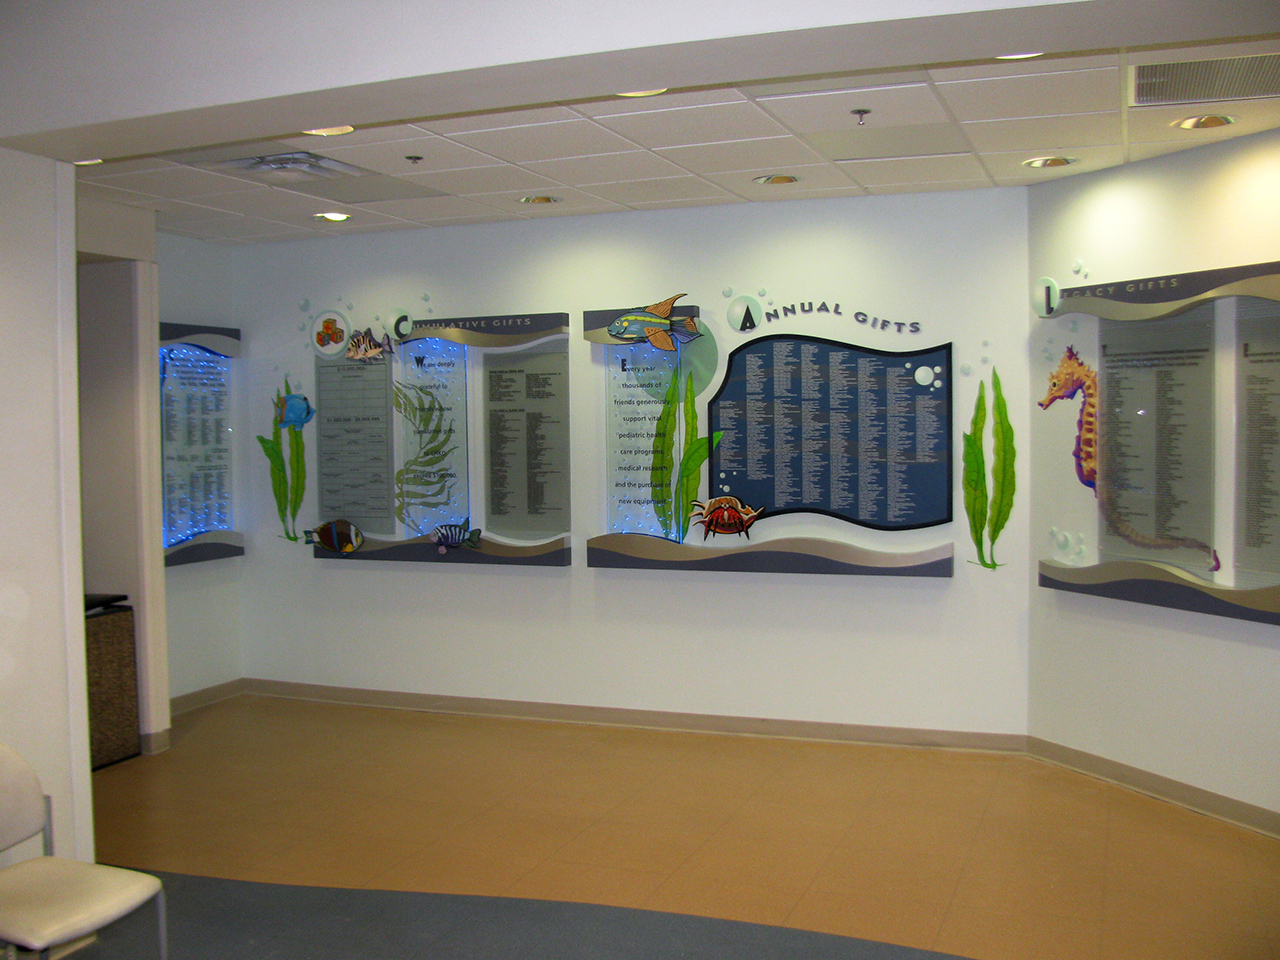 led lit donor wall